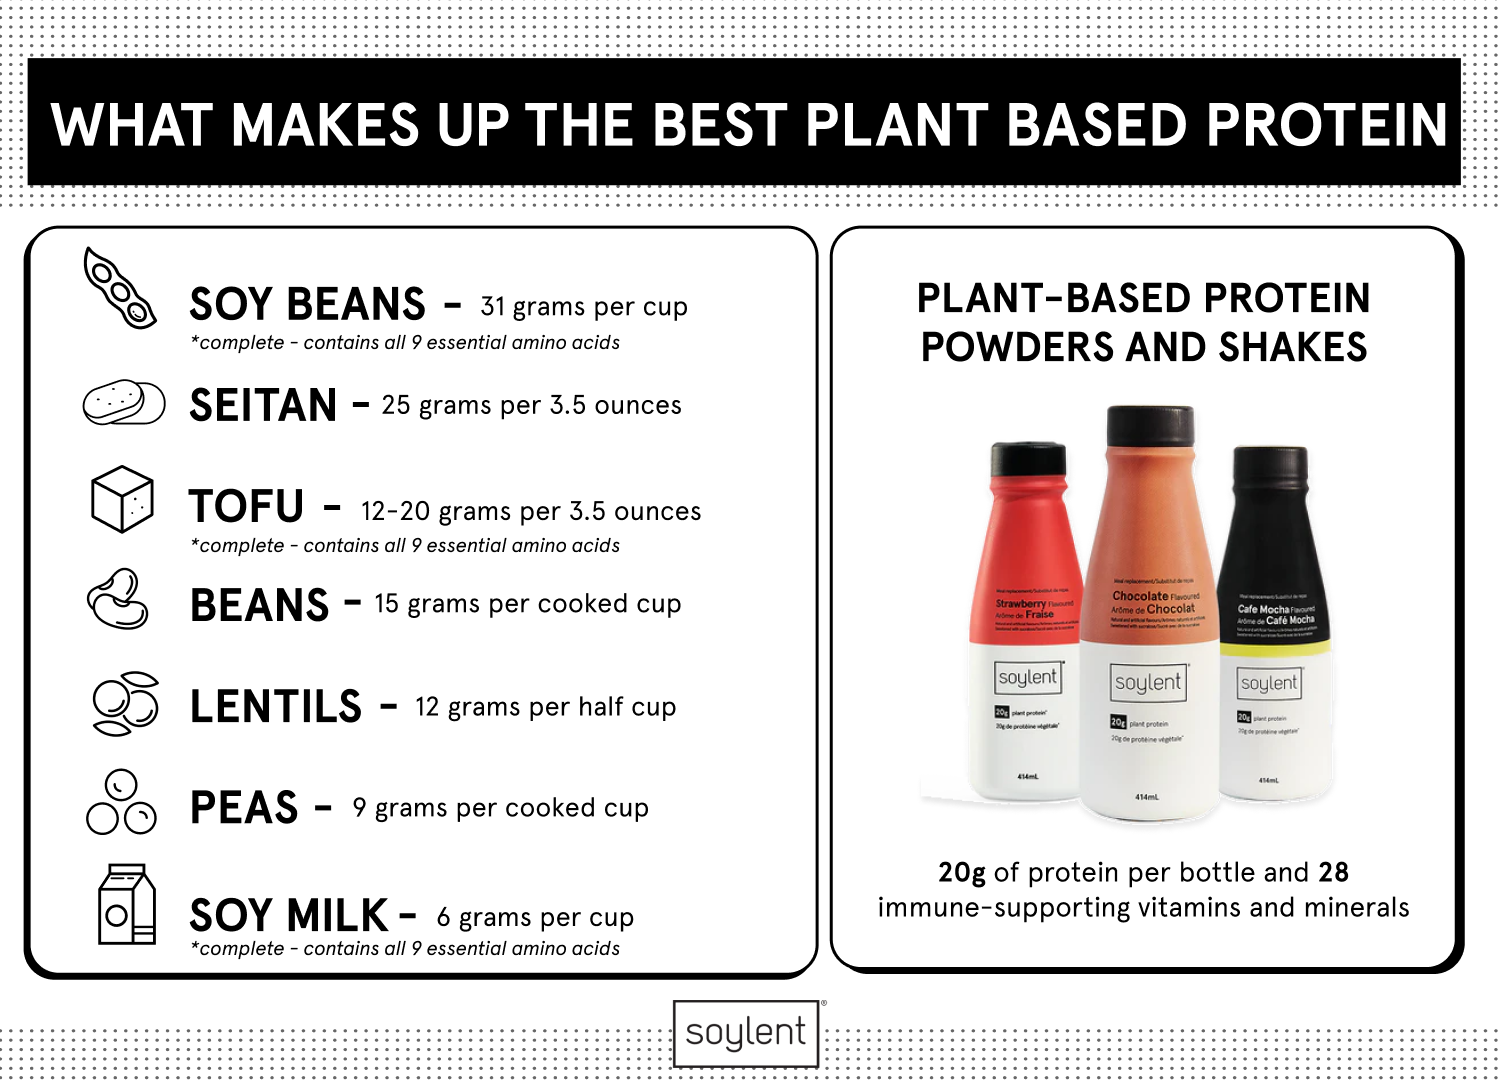 What Makes Up the Best Plant-Based Protein